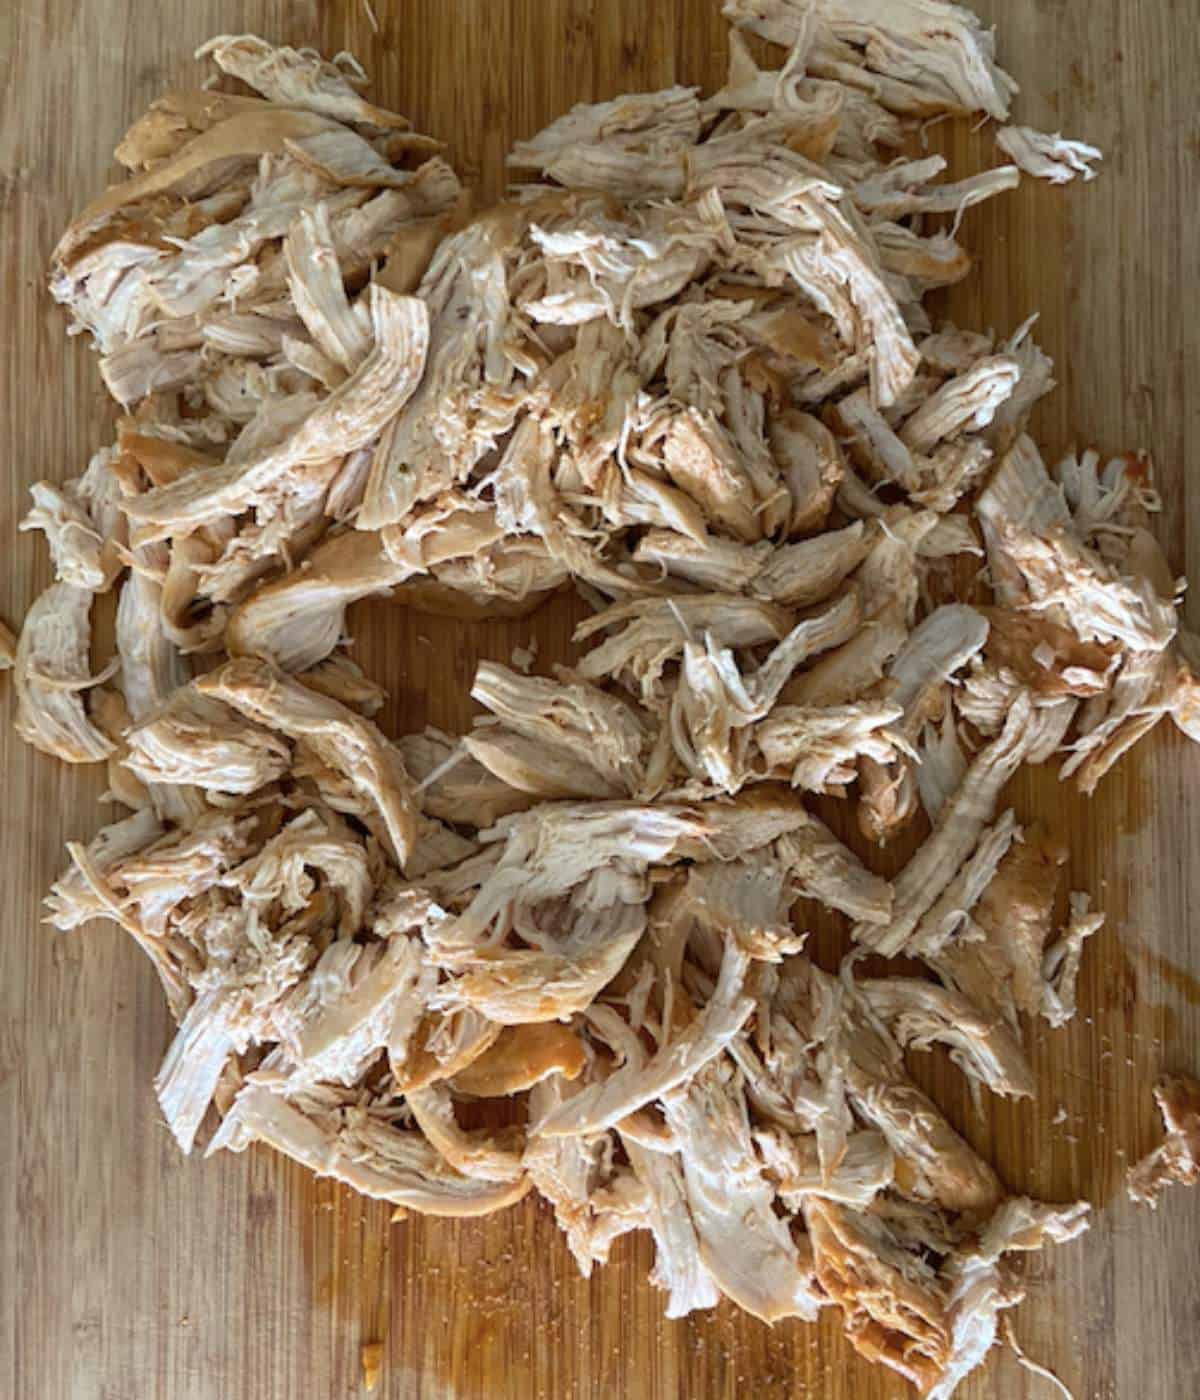 Pulled chicken on cutting board.